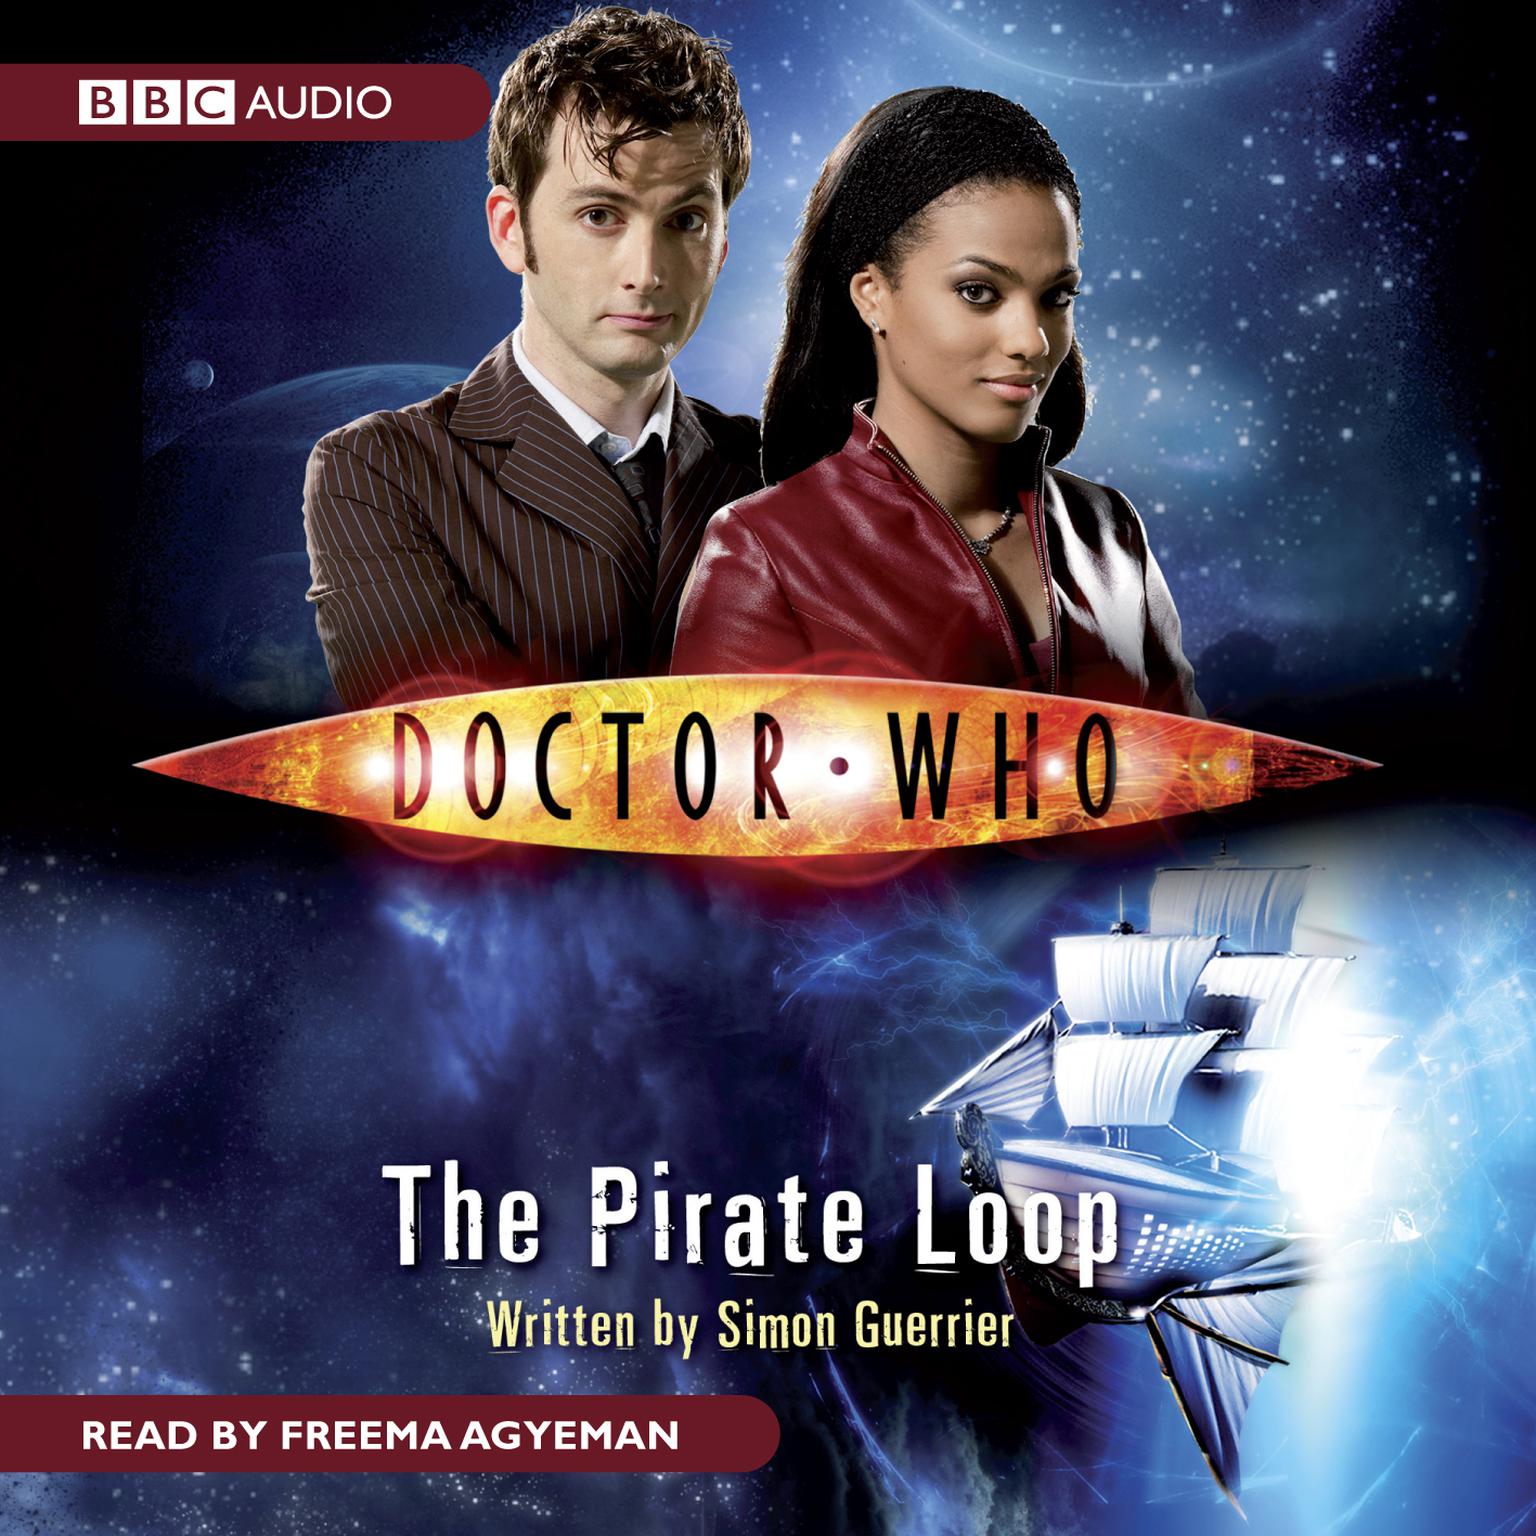 Doctor Who: The Pirate Loop (Abridged) Audiobook, by Simon Guerrier